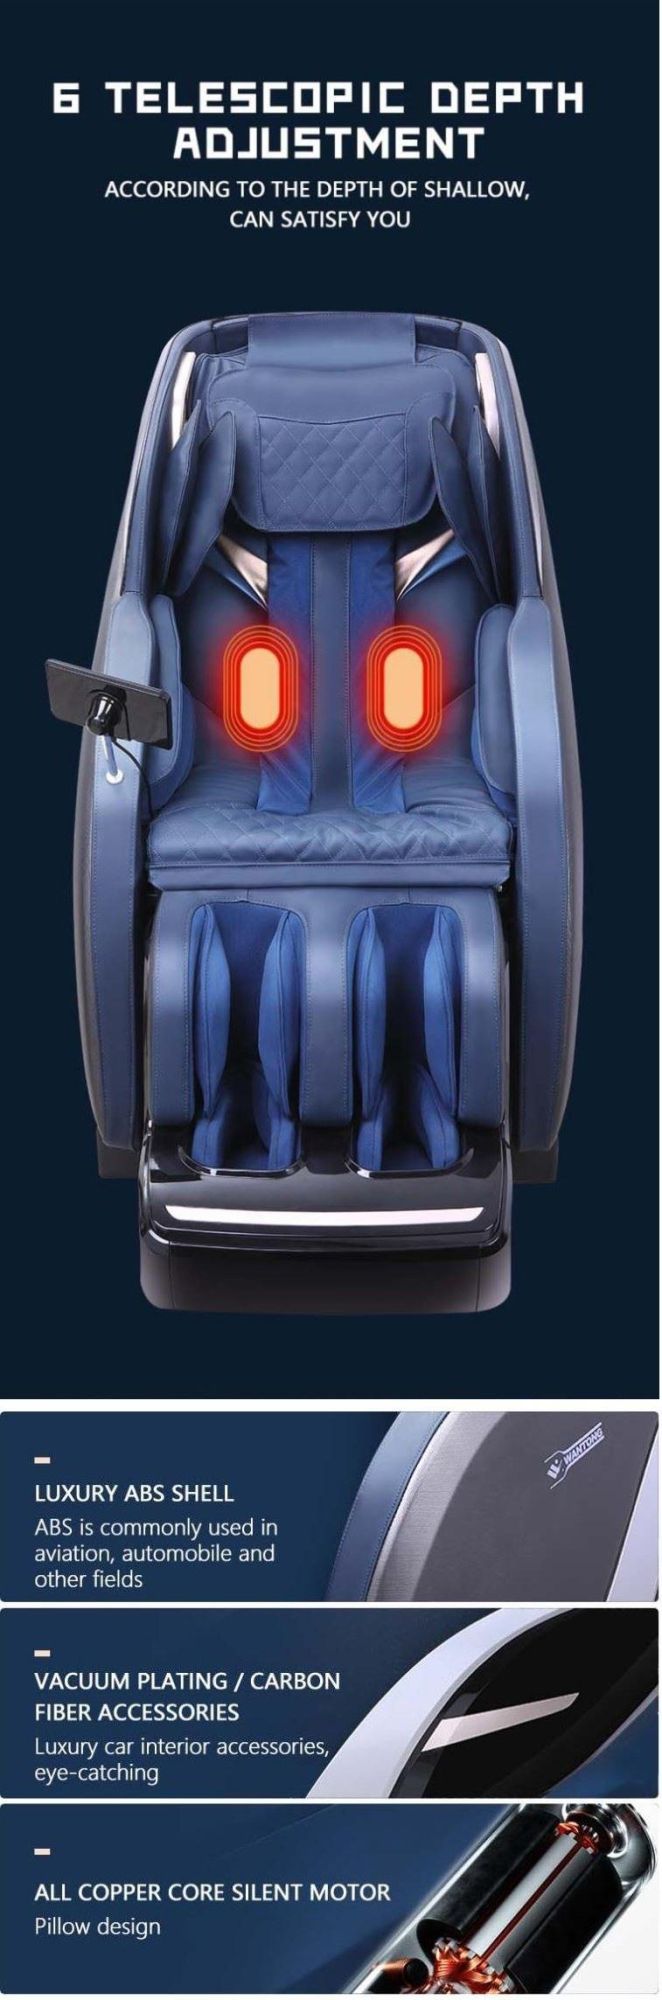 Professional Wholesale Full Body High Quality Electric Massage Chair Smart 4D Relax Heating Massager